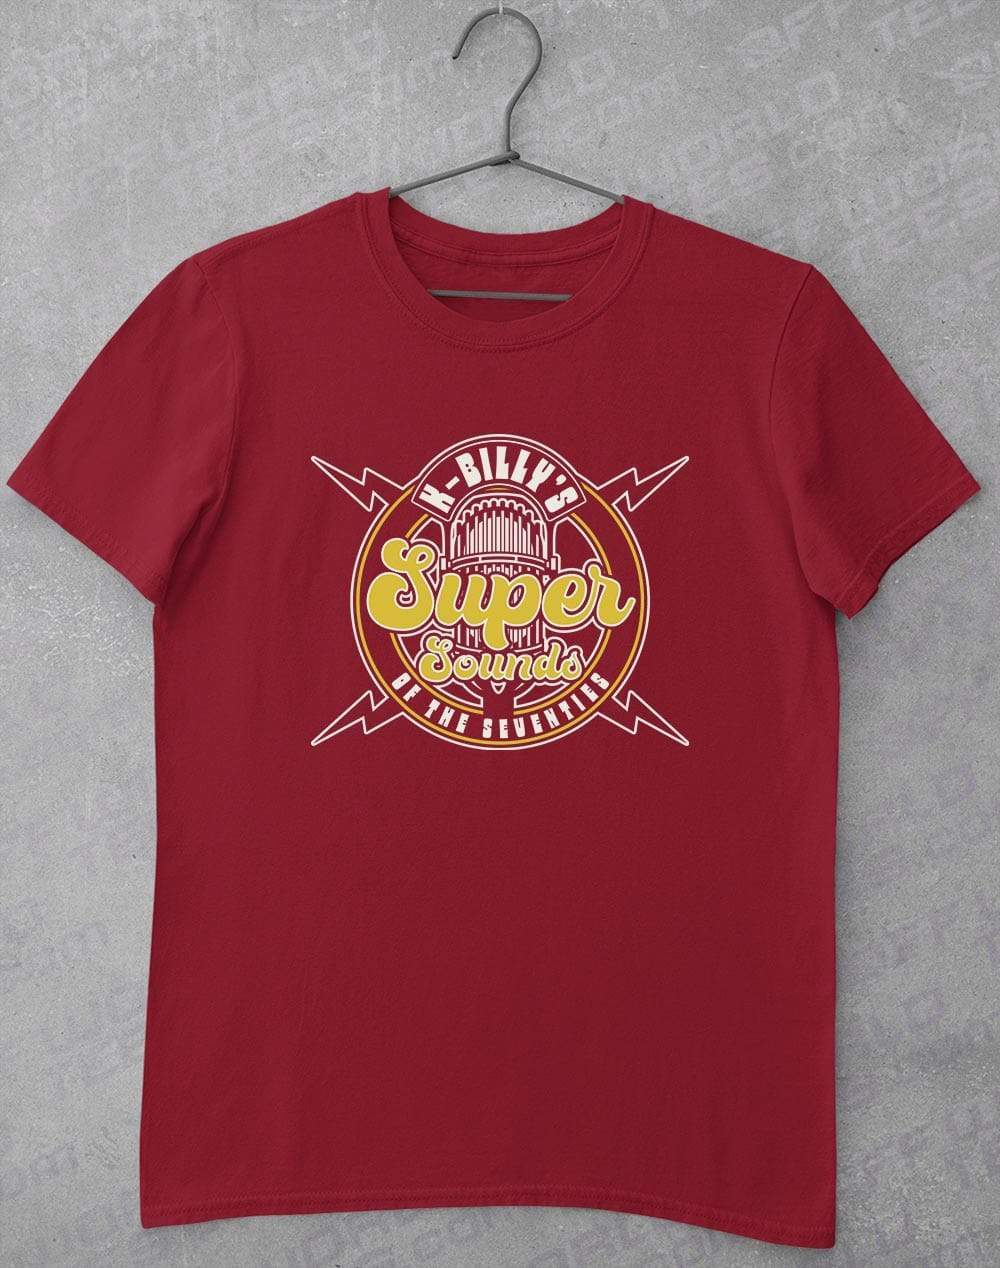 K-Billy's Super Sounds of the 70's T-Shirt L / Cardinal Red  - Off World Tees